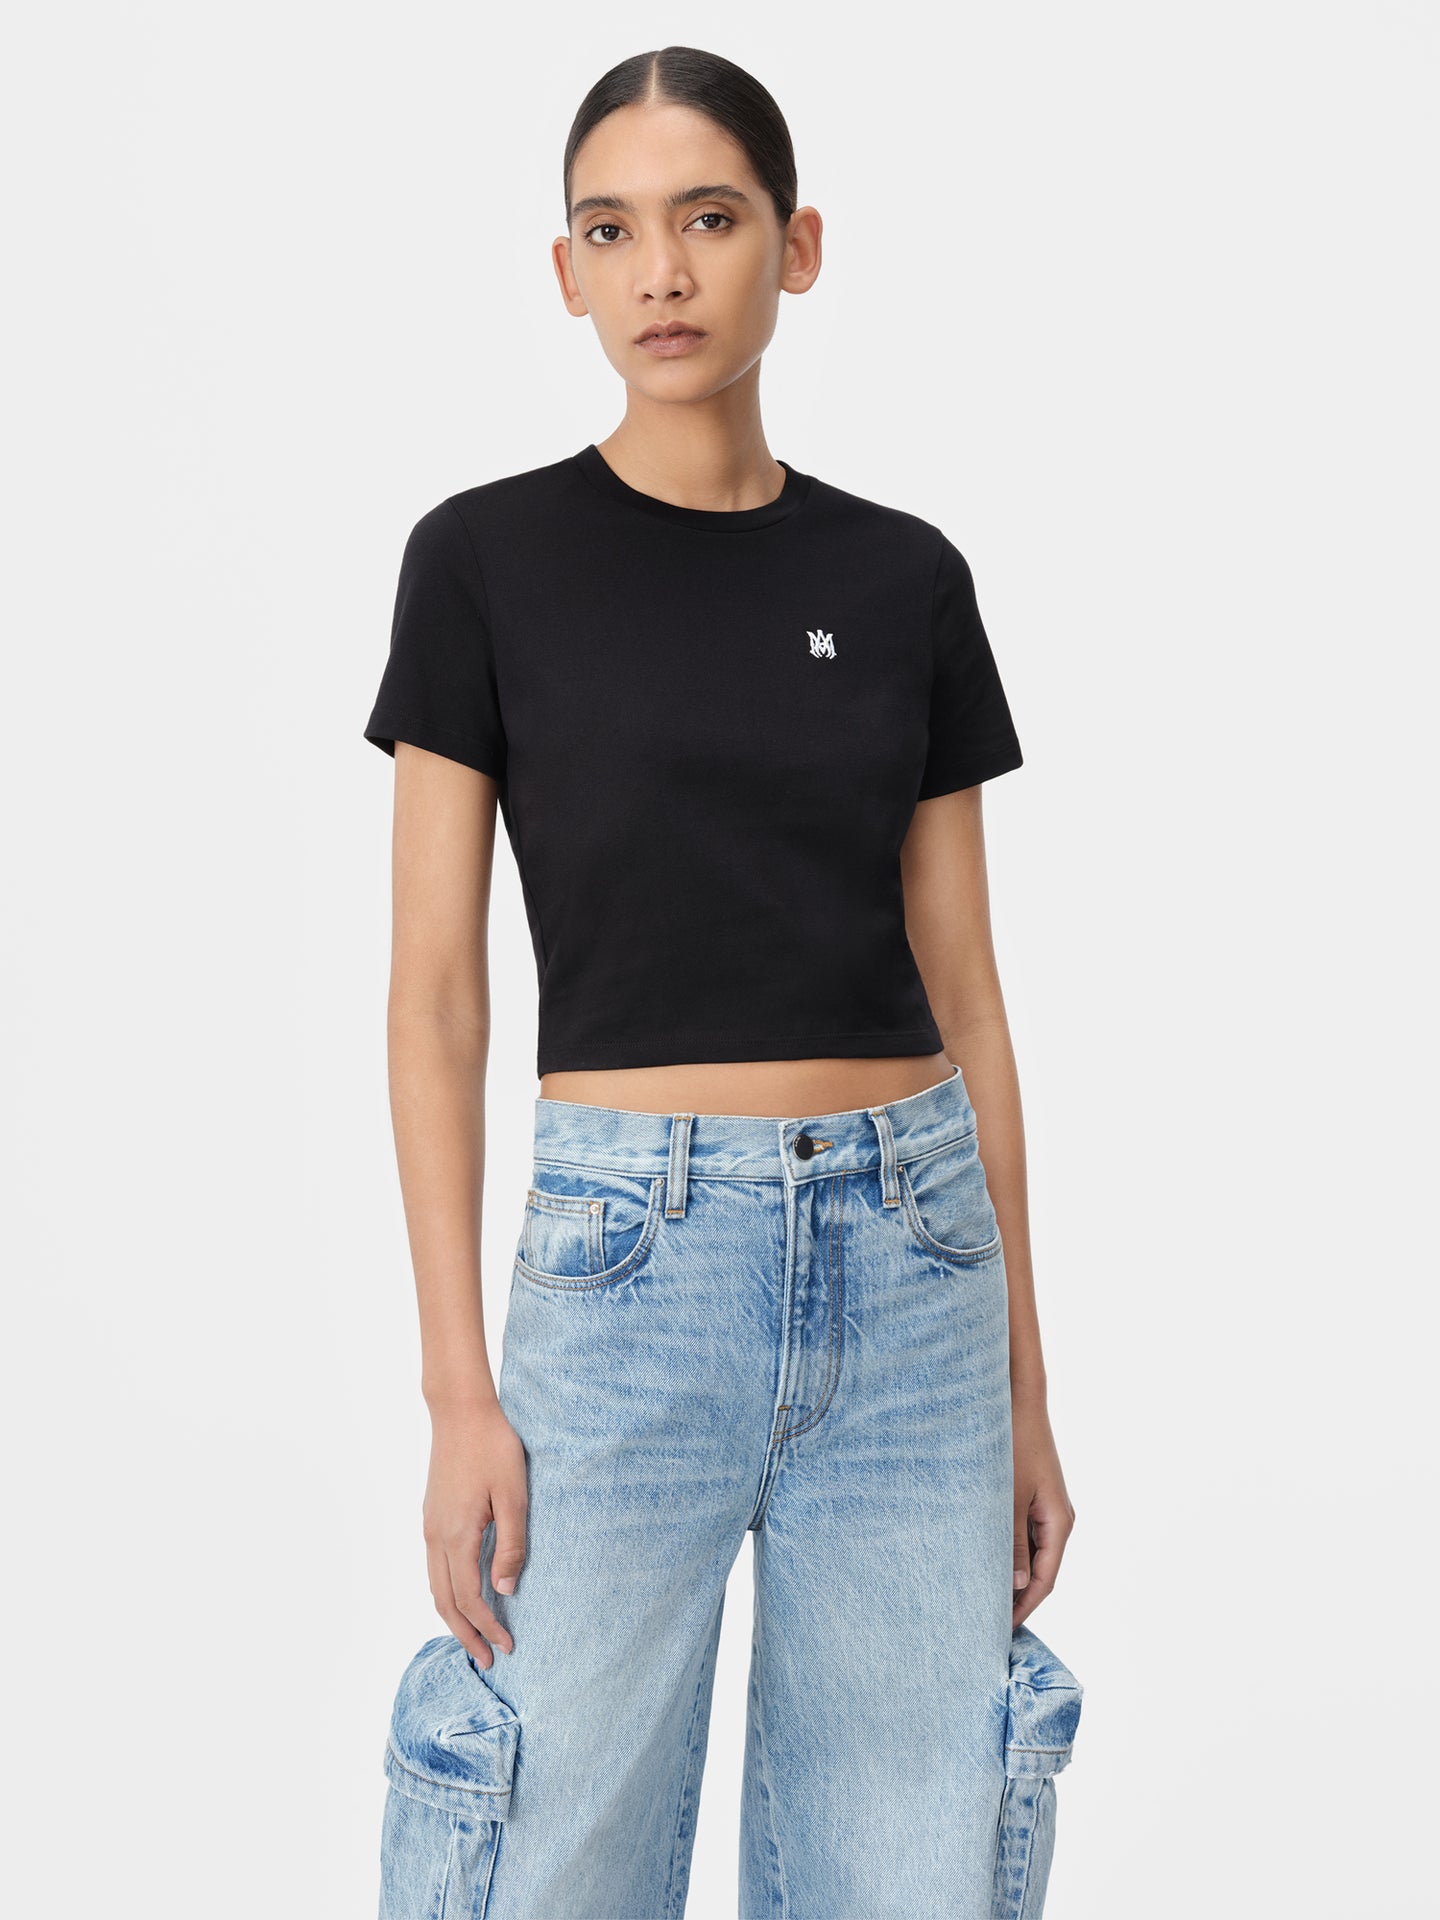 WOMEN - WOMEN'S MA EMBROIDERED BABY TEE - Black